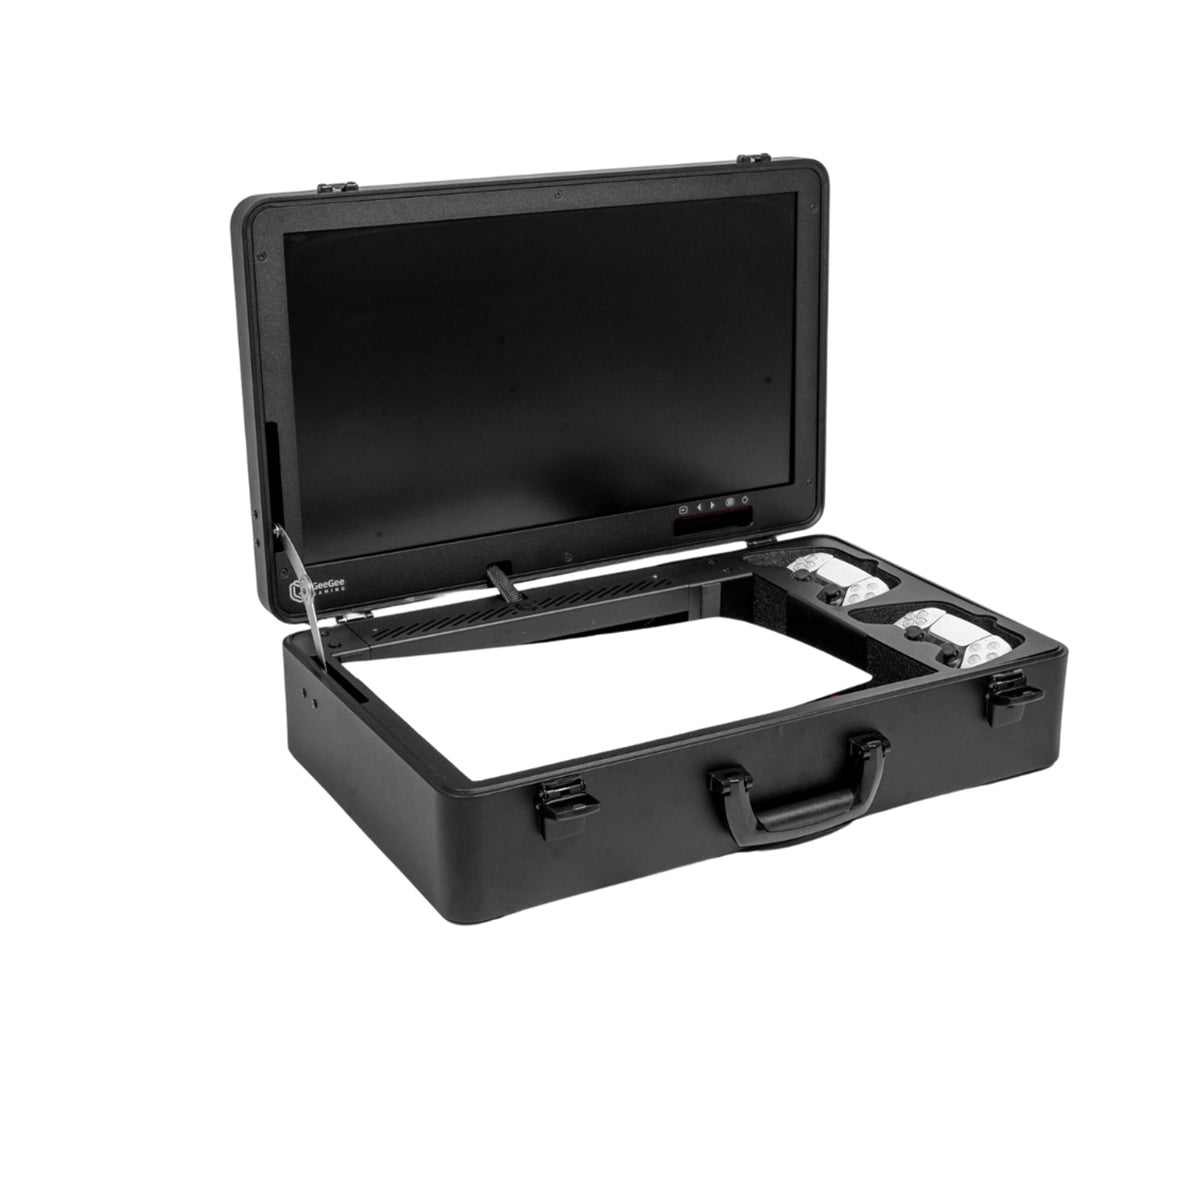 GeeGee EDGE PS5 gaming case